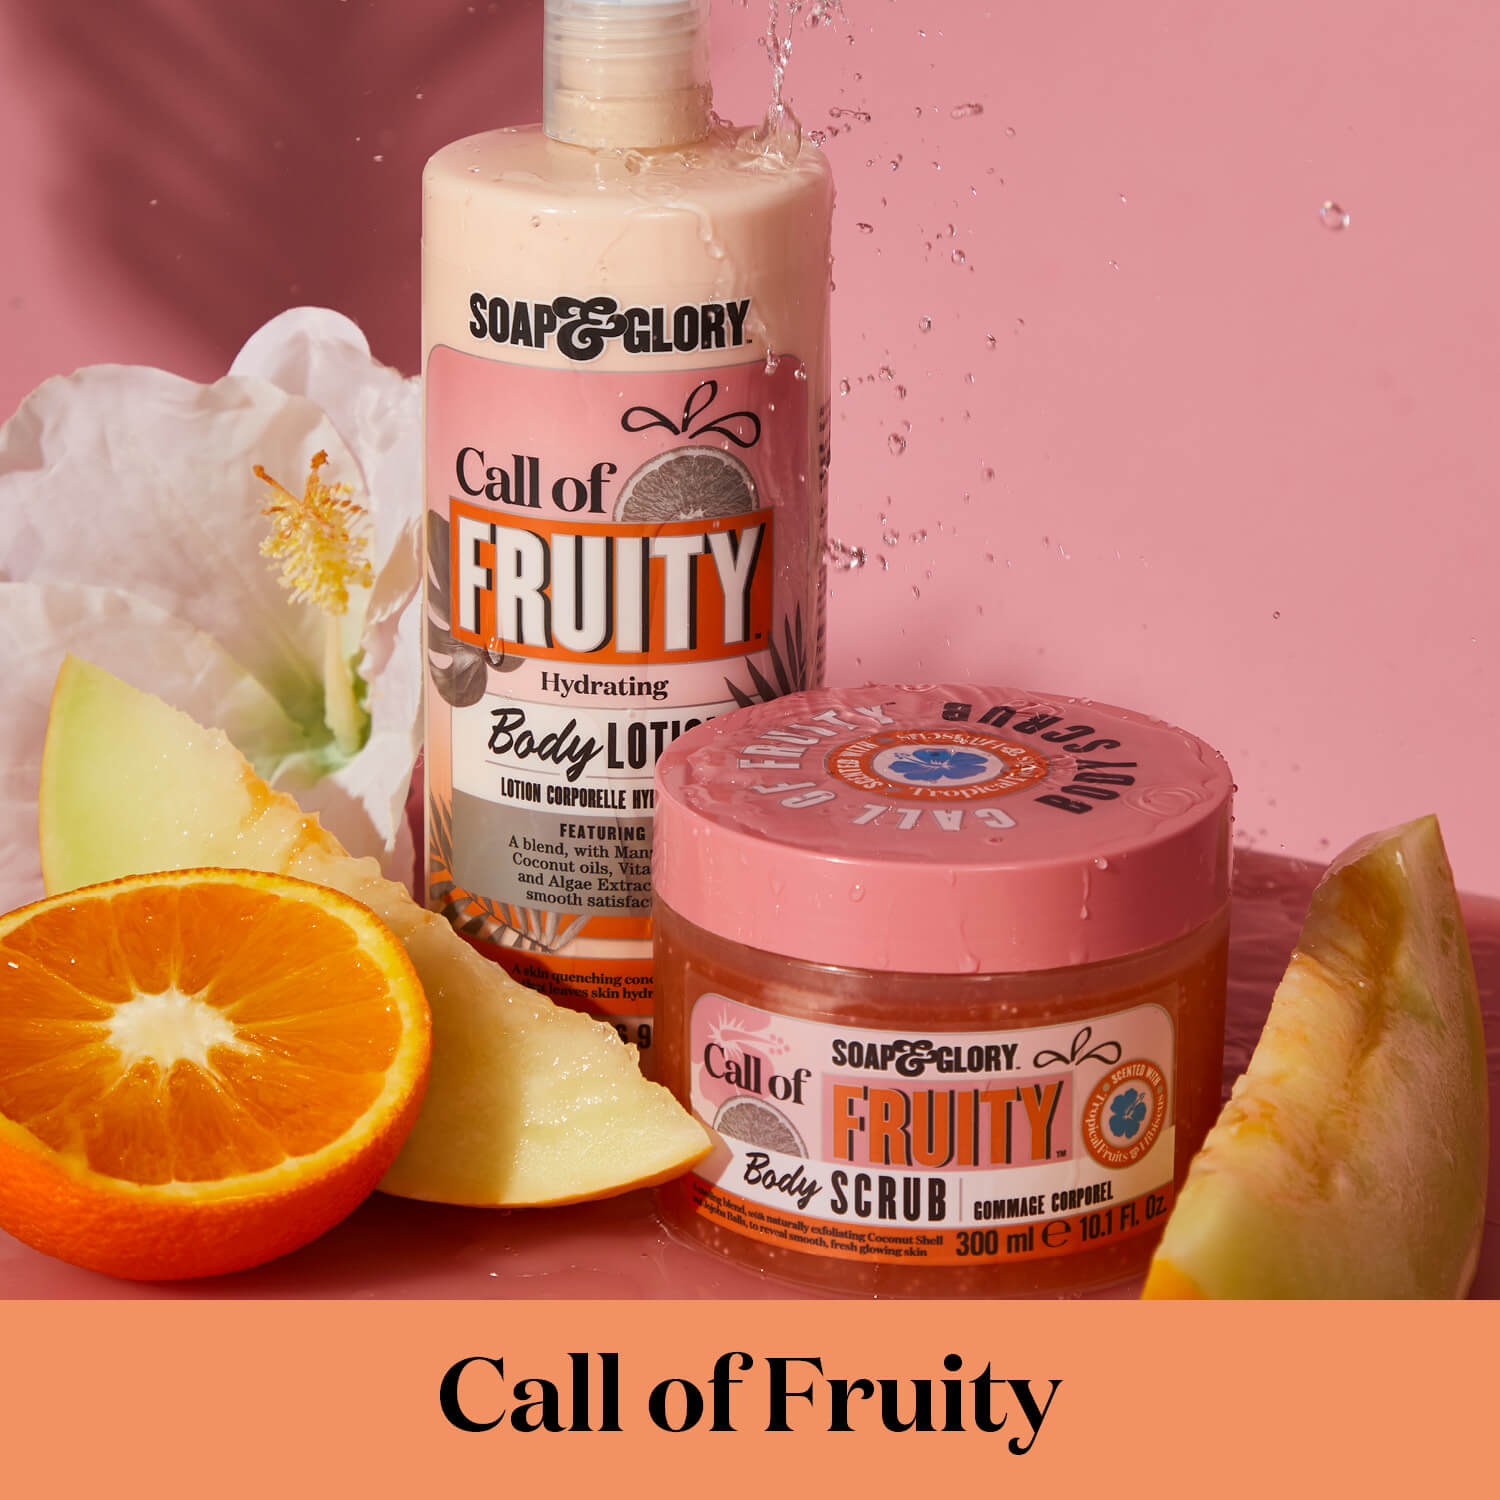 CALL OF FRUITY